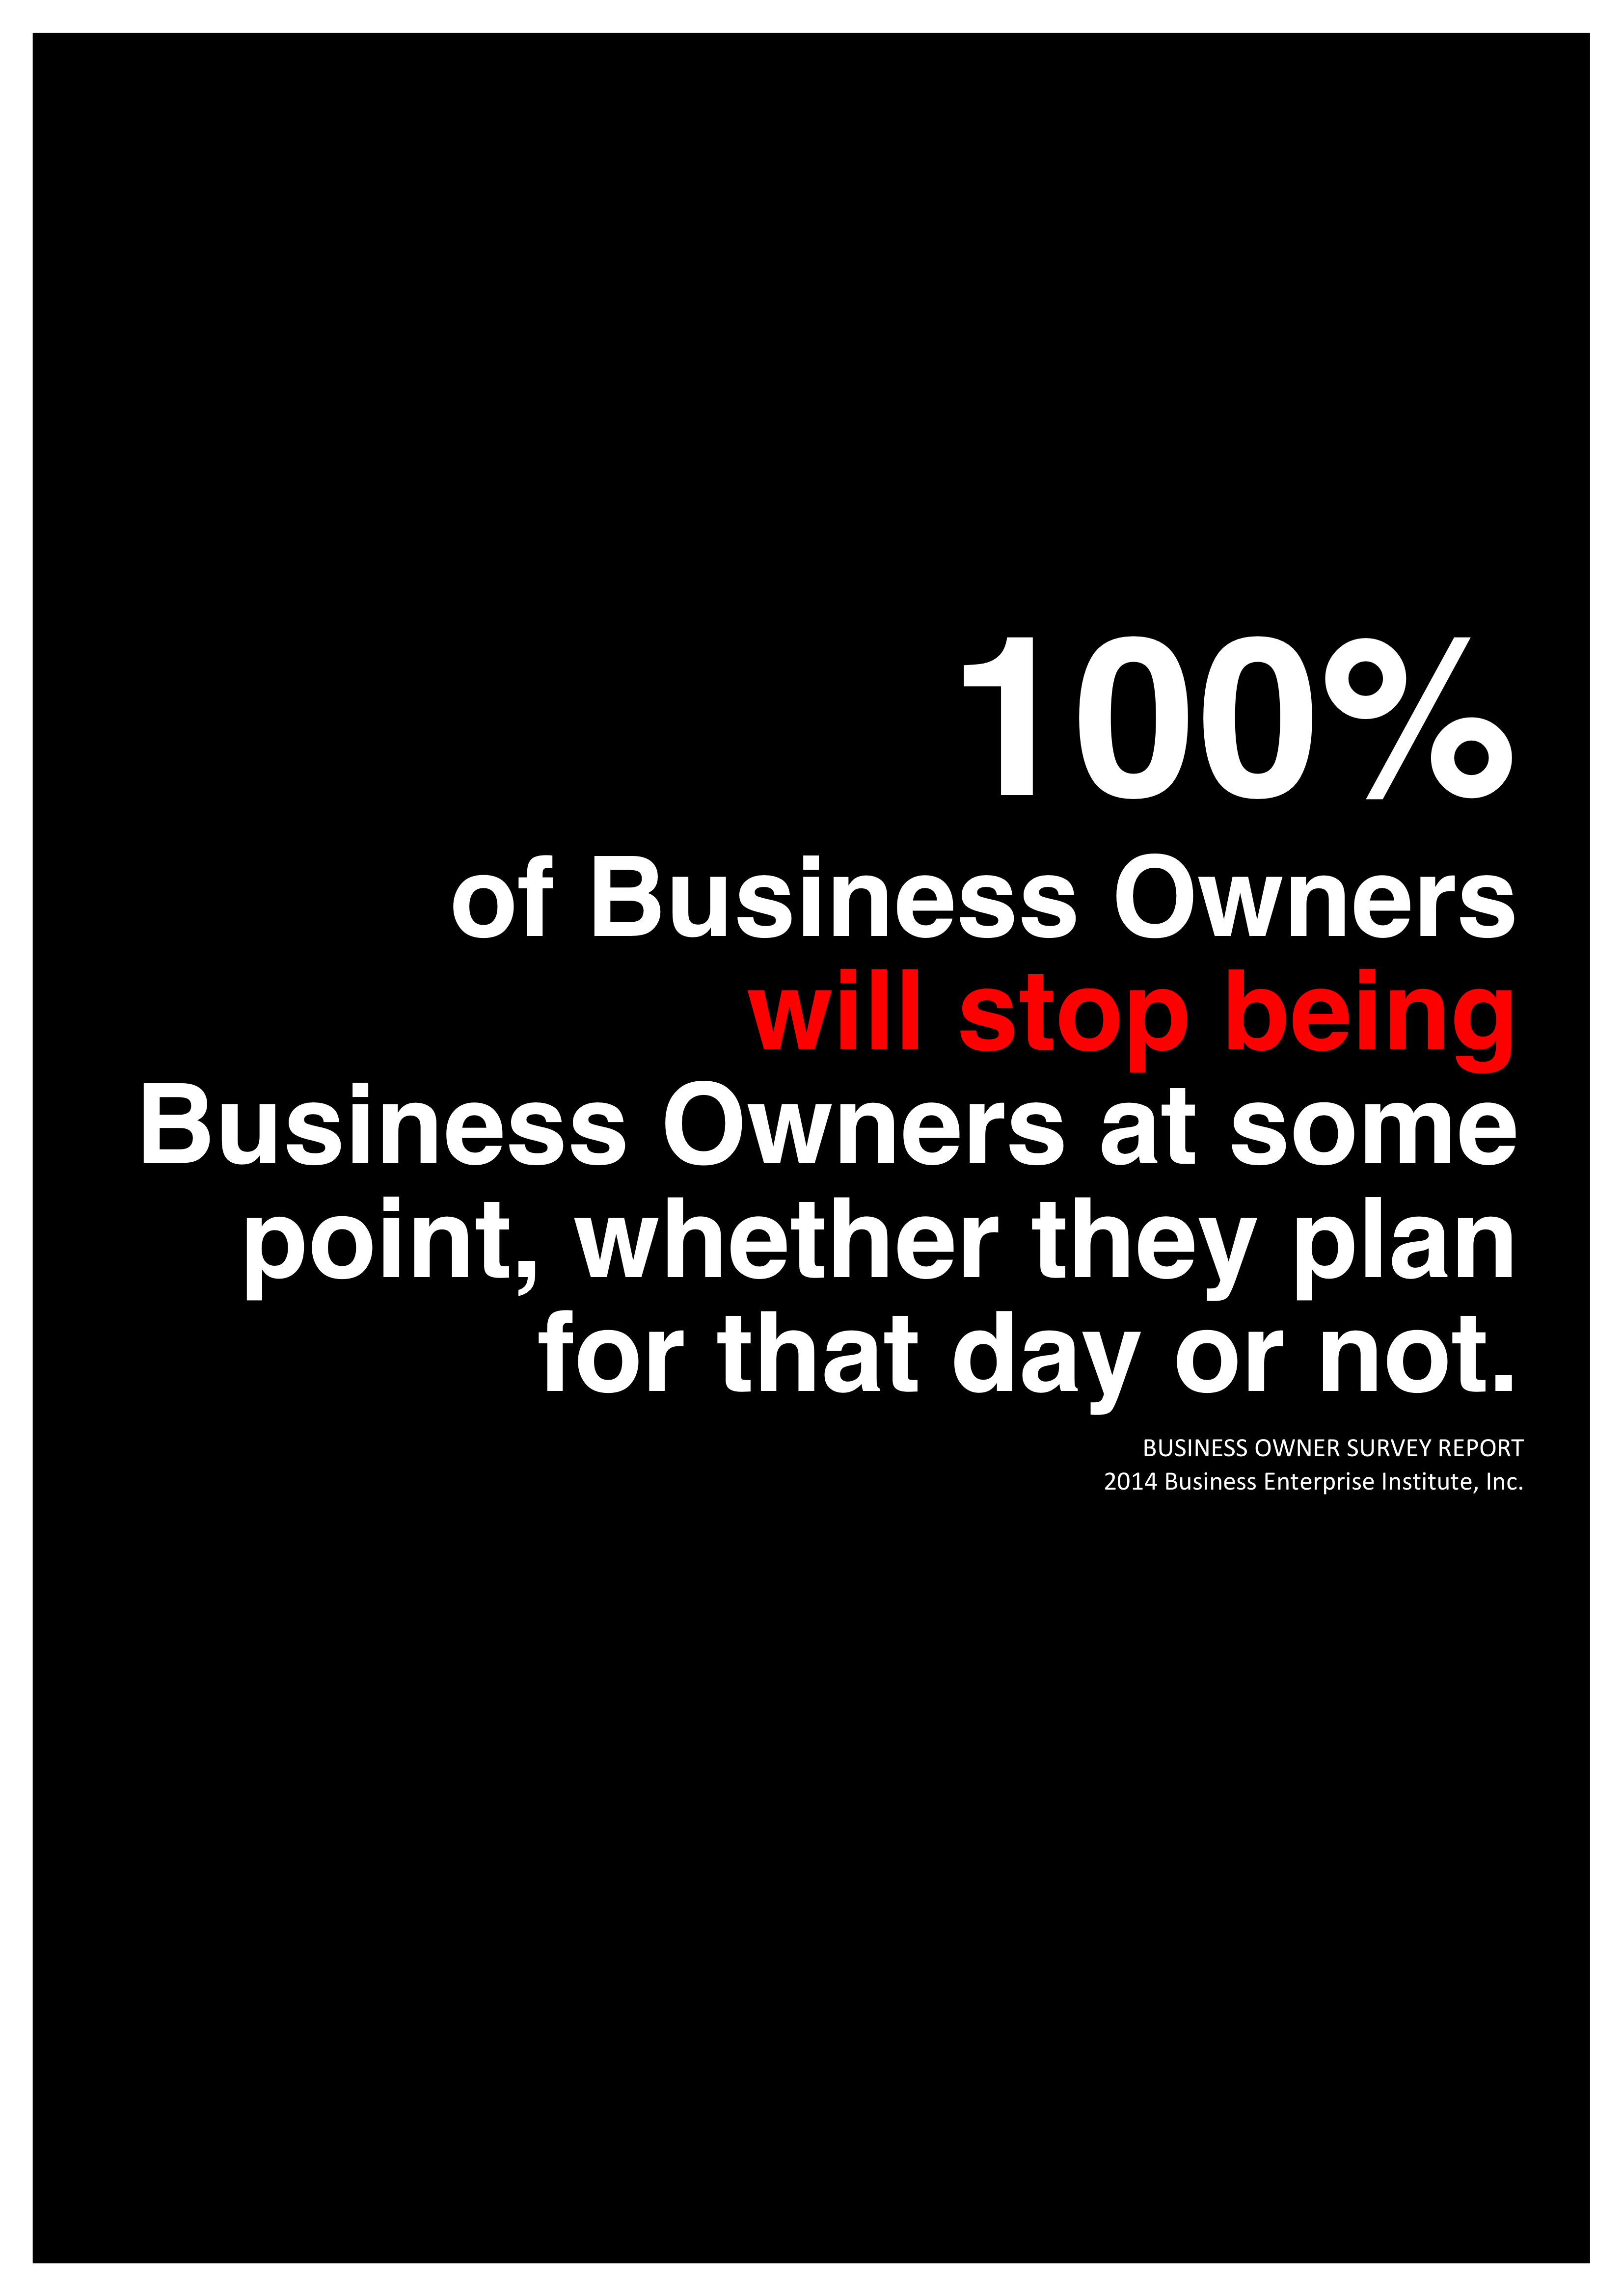 Business Owner Survey Report